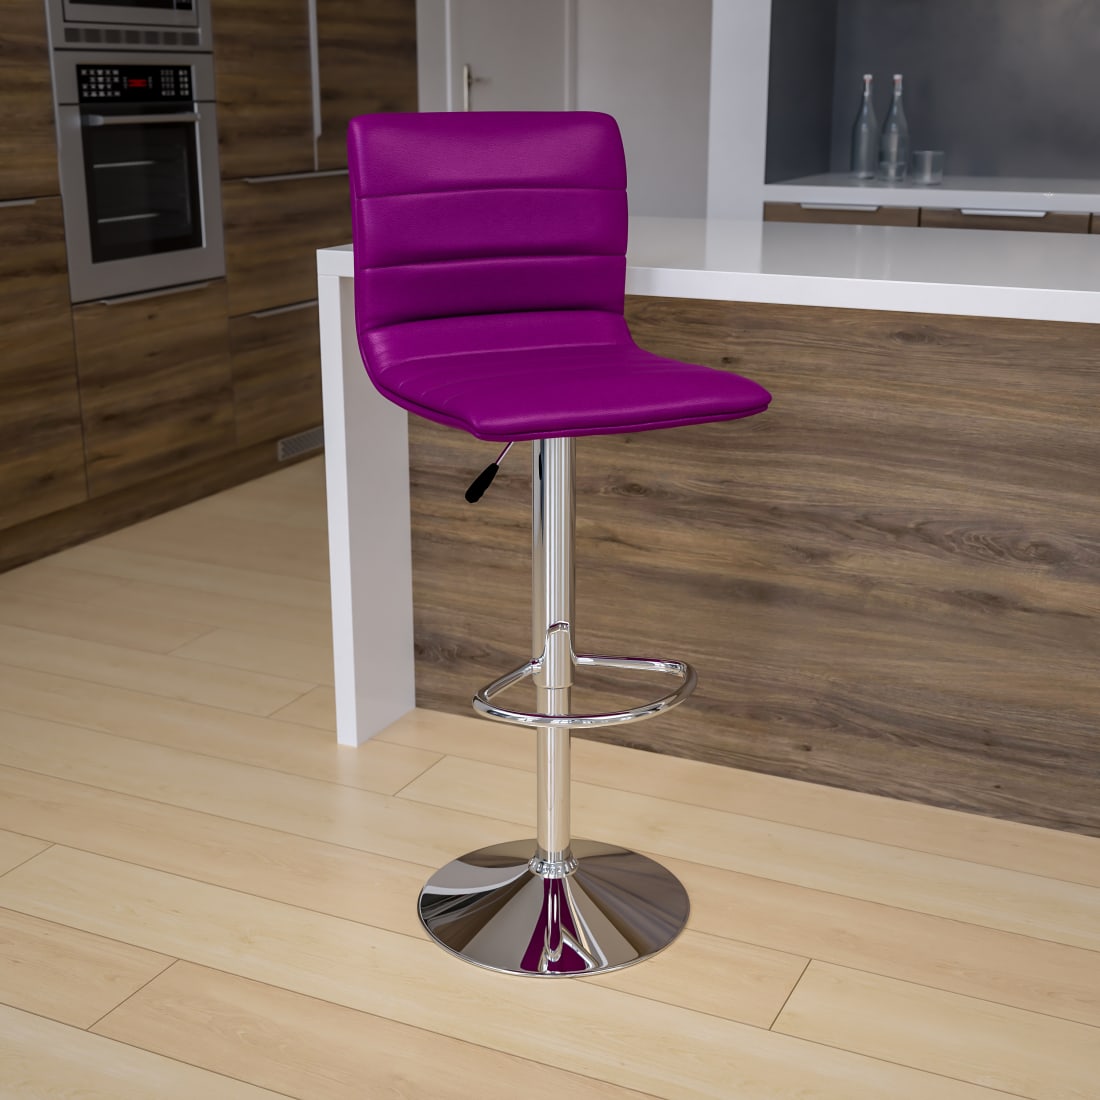 Modern Purple Vinyl Adjustable Bar Stool with Back, Counter Height Swivel Stool with Chrome Pedestal Base